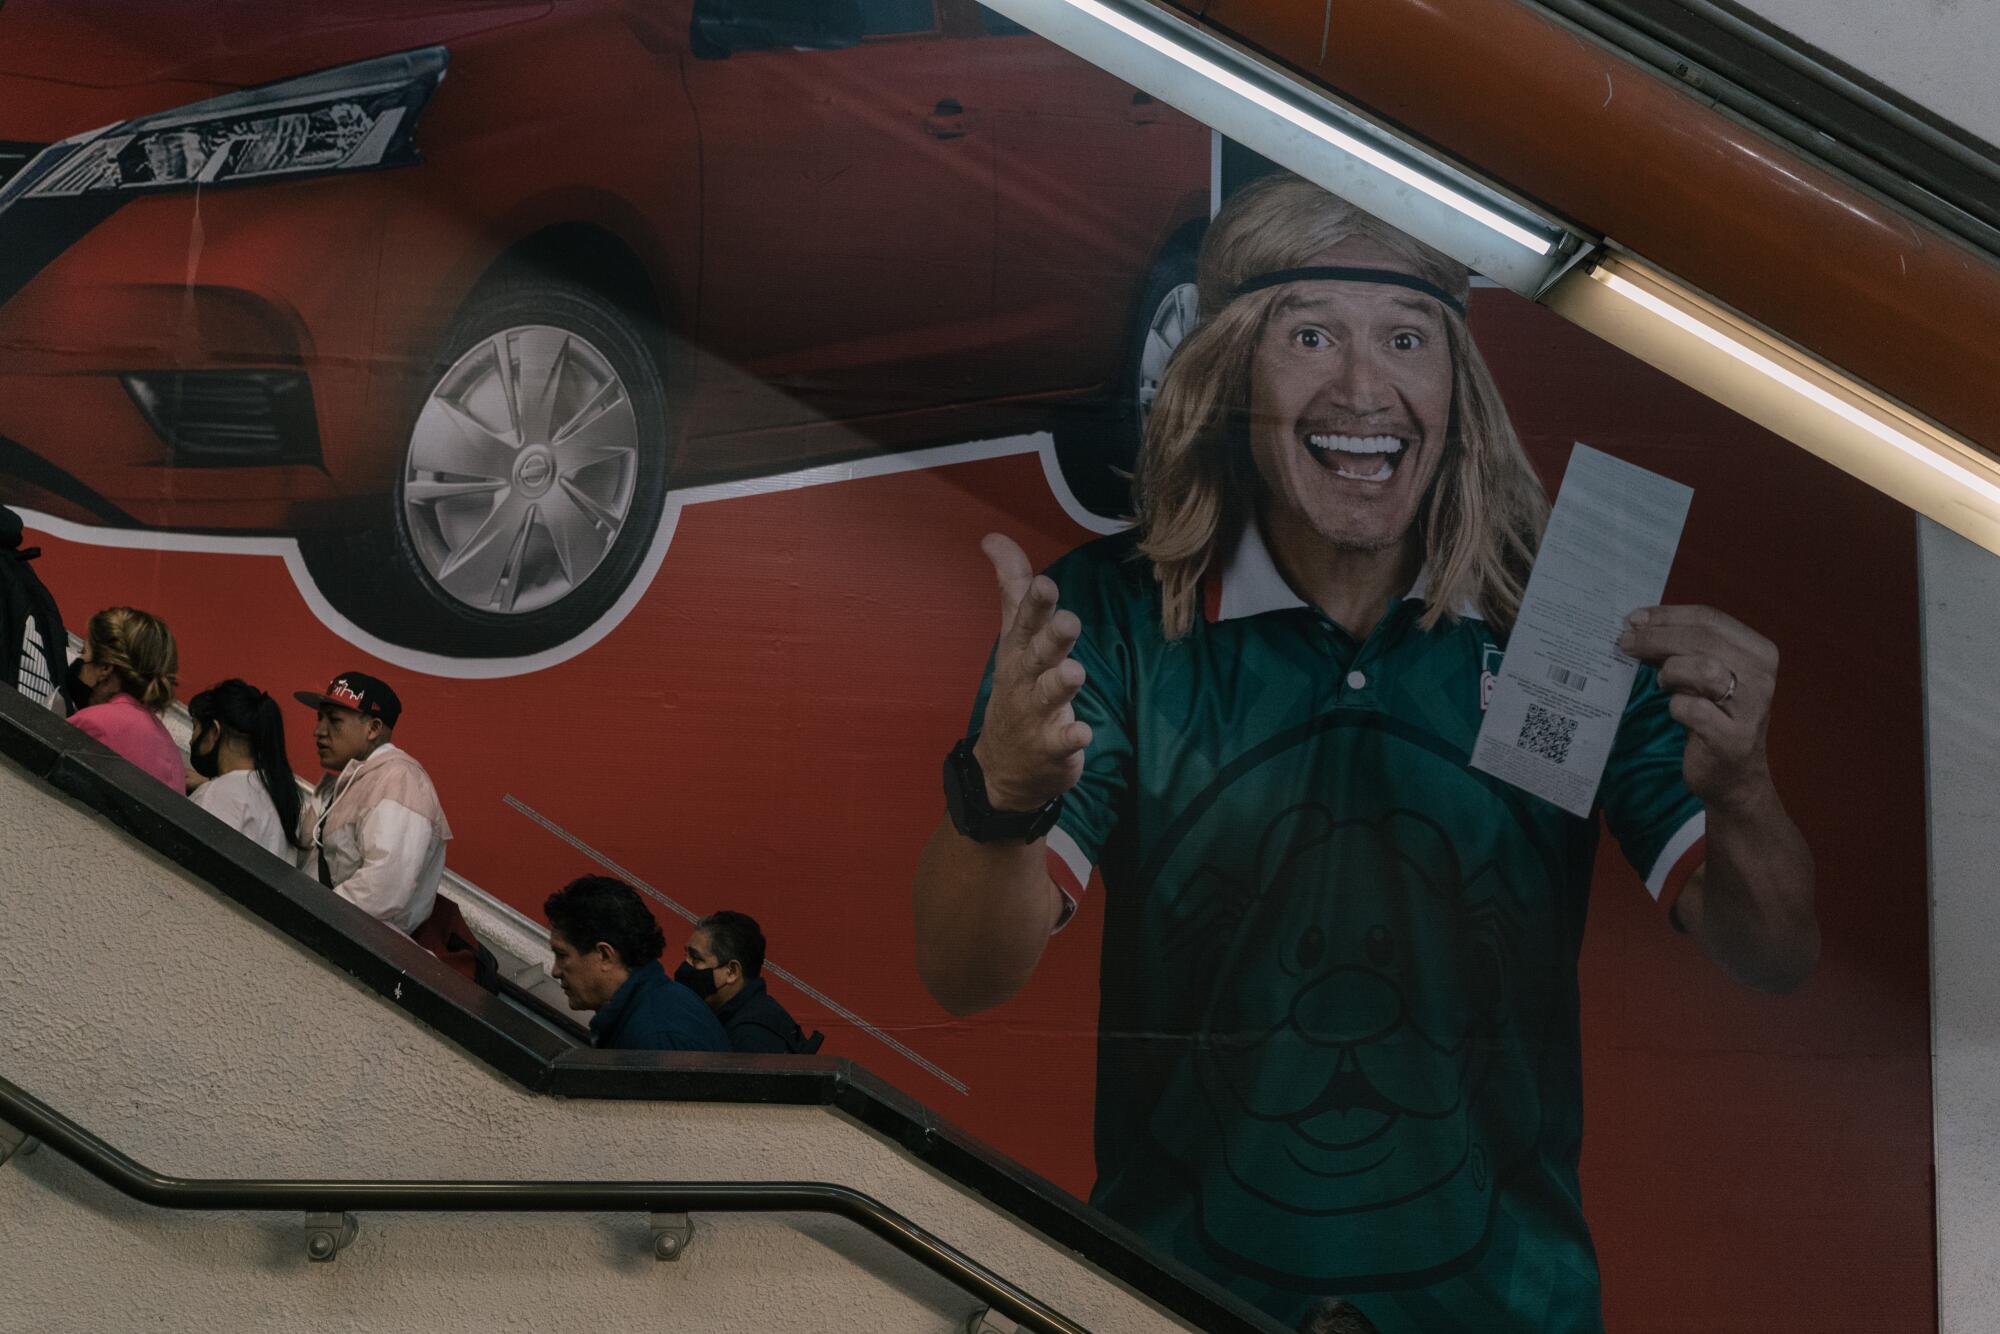 An ad near an escalator shows a man with blond hair and green shirt holding a piece of paper